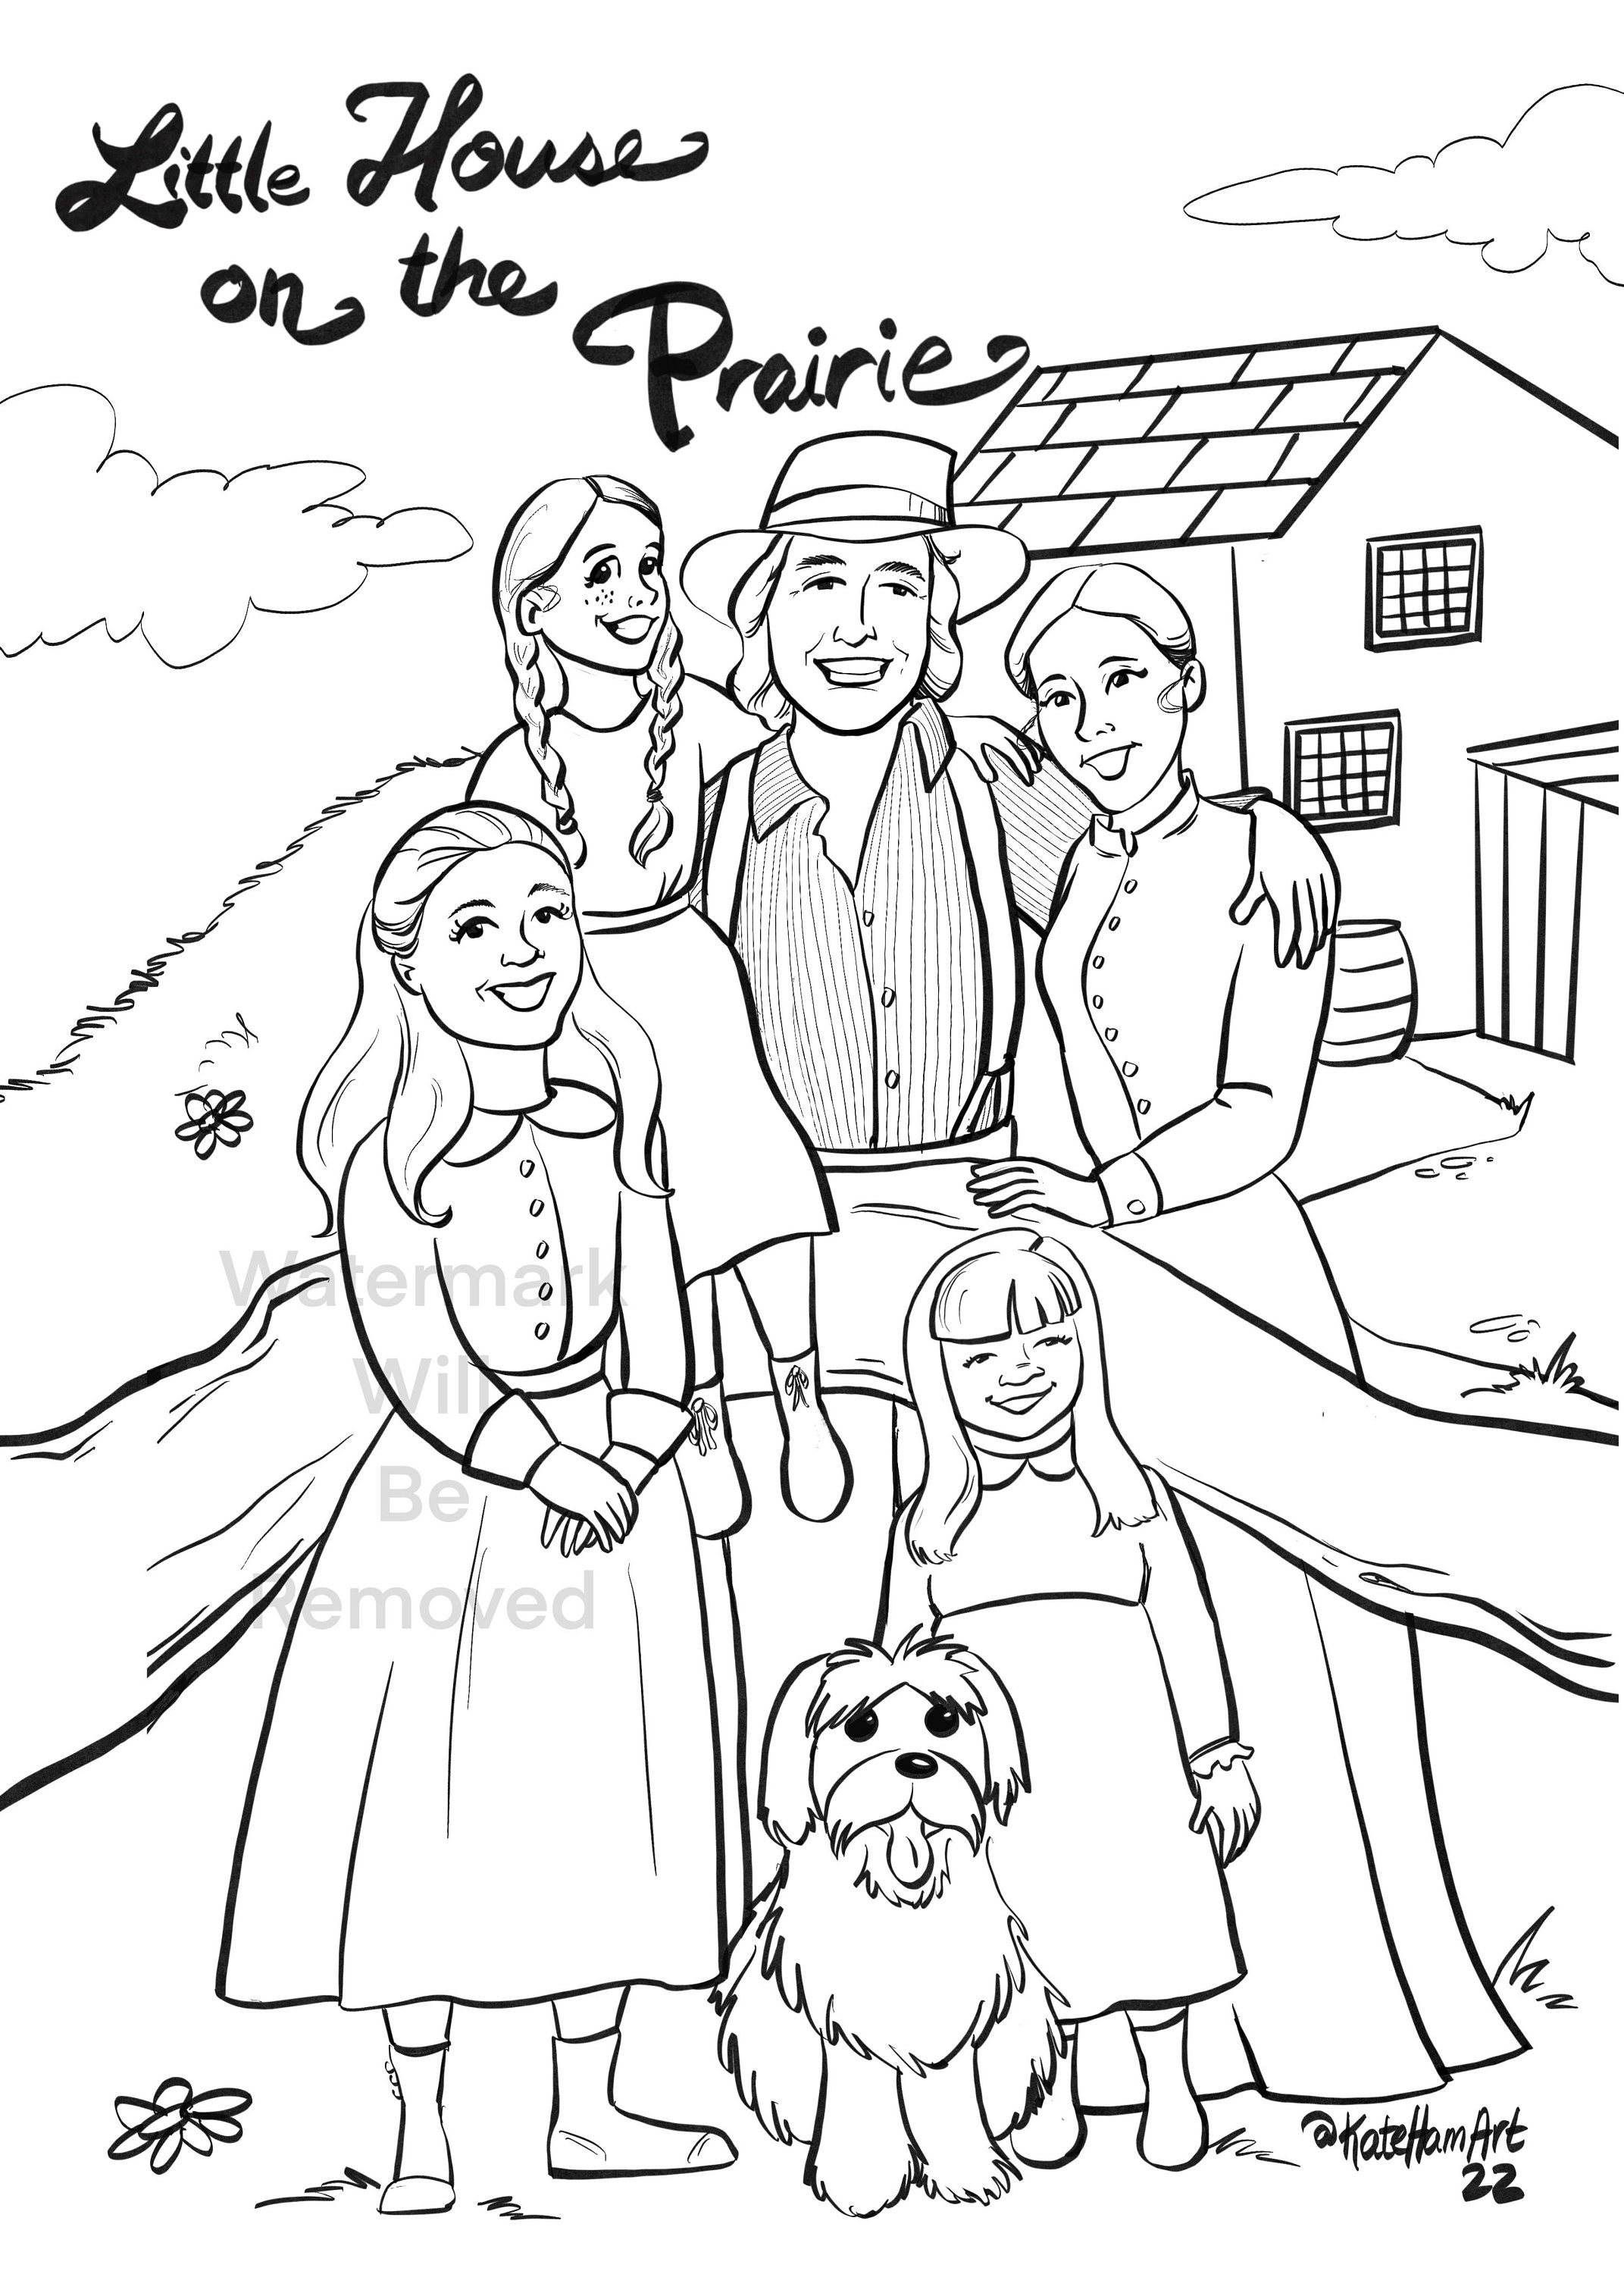 little-house-on-the-prairie-coloring-page-instant-download-now-etsy